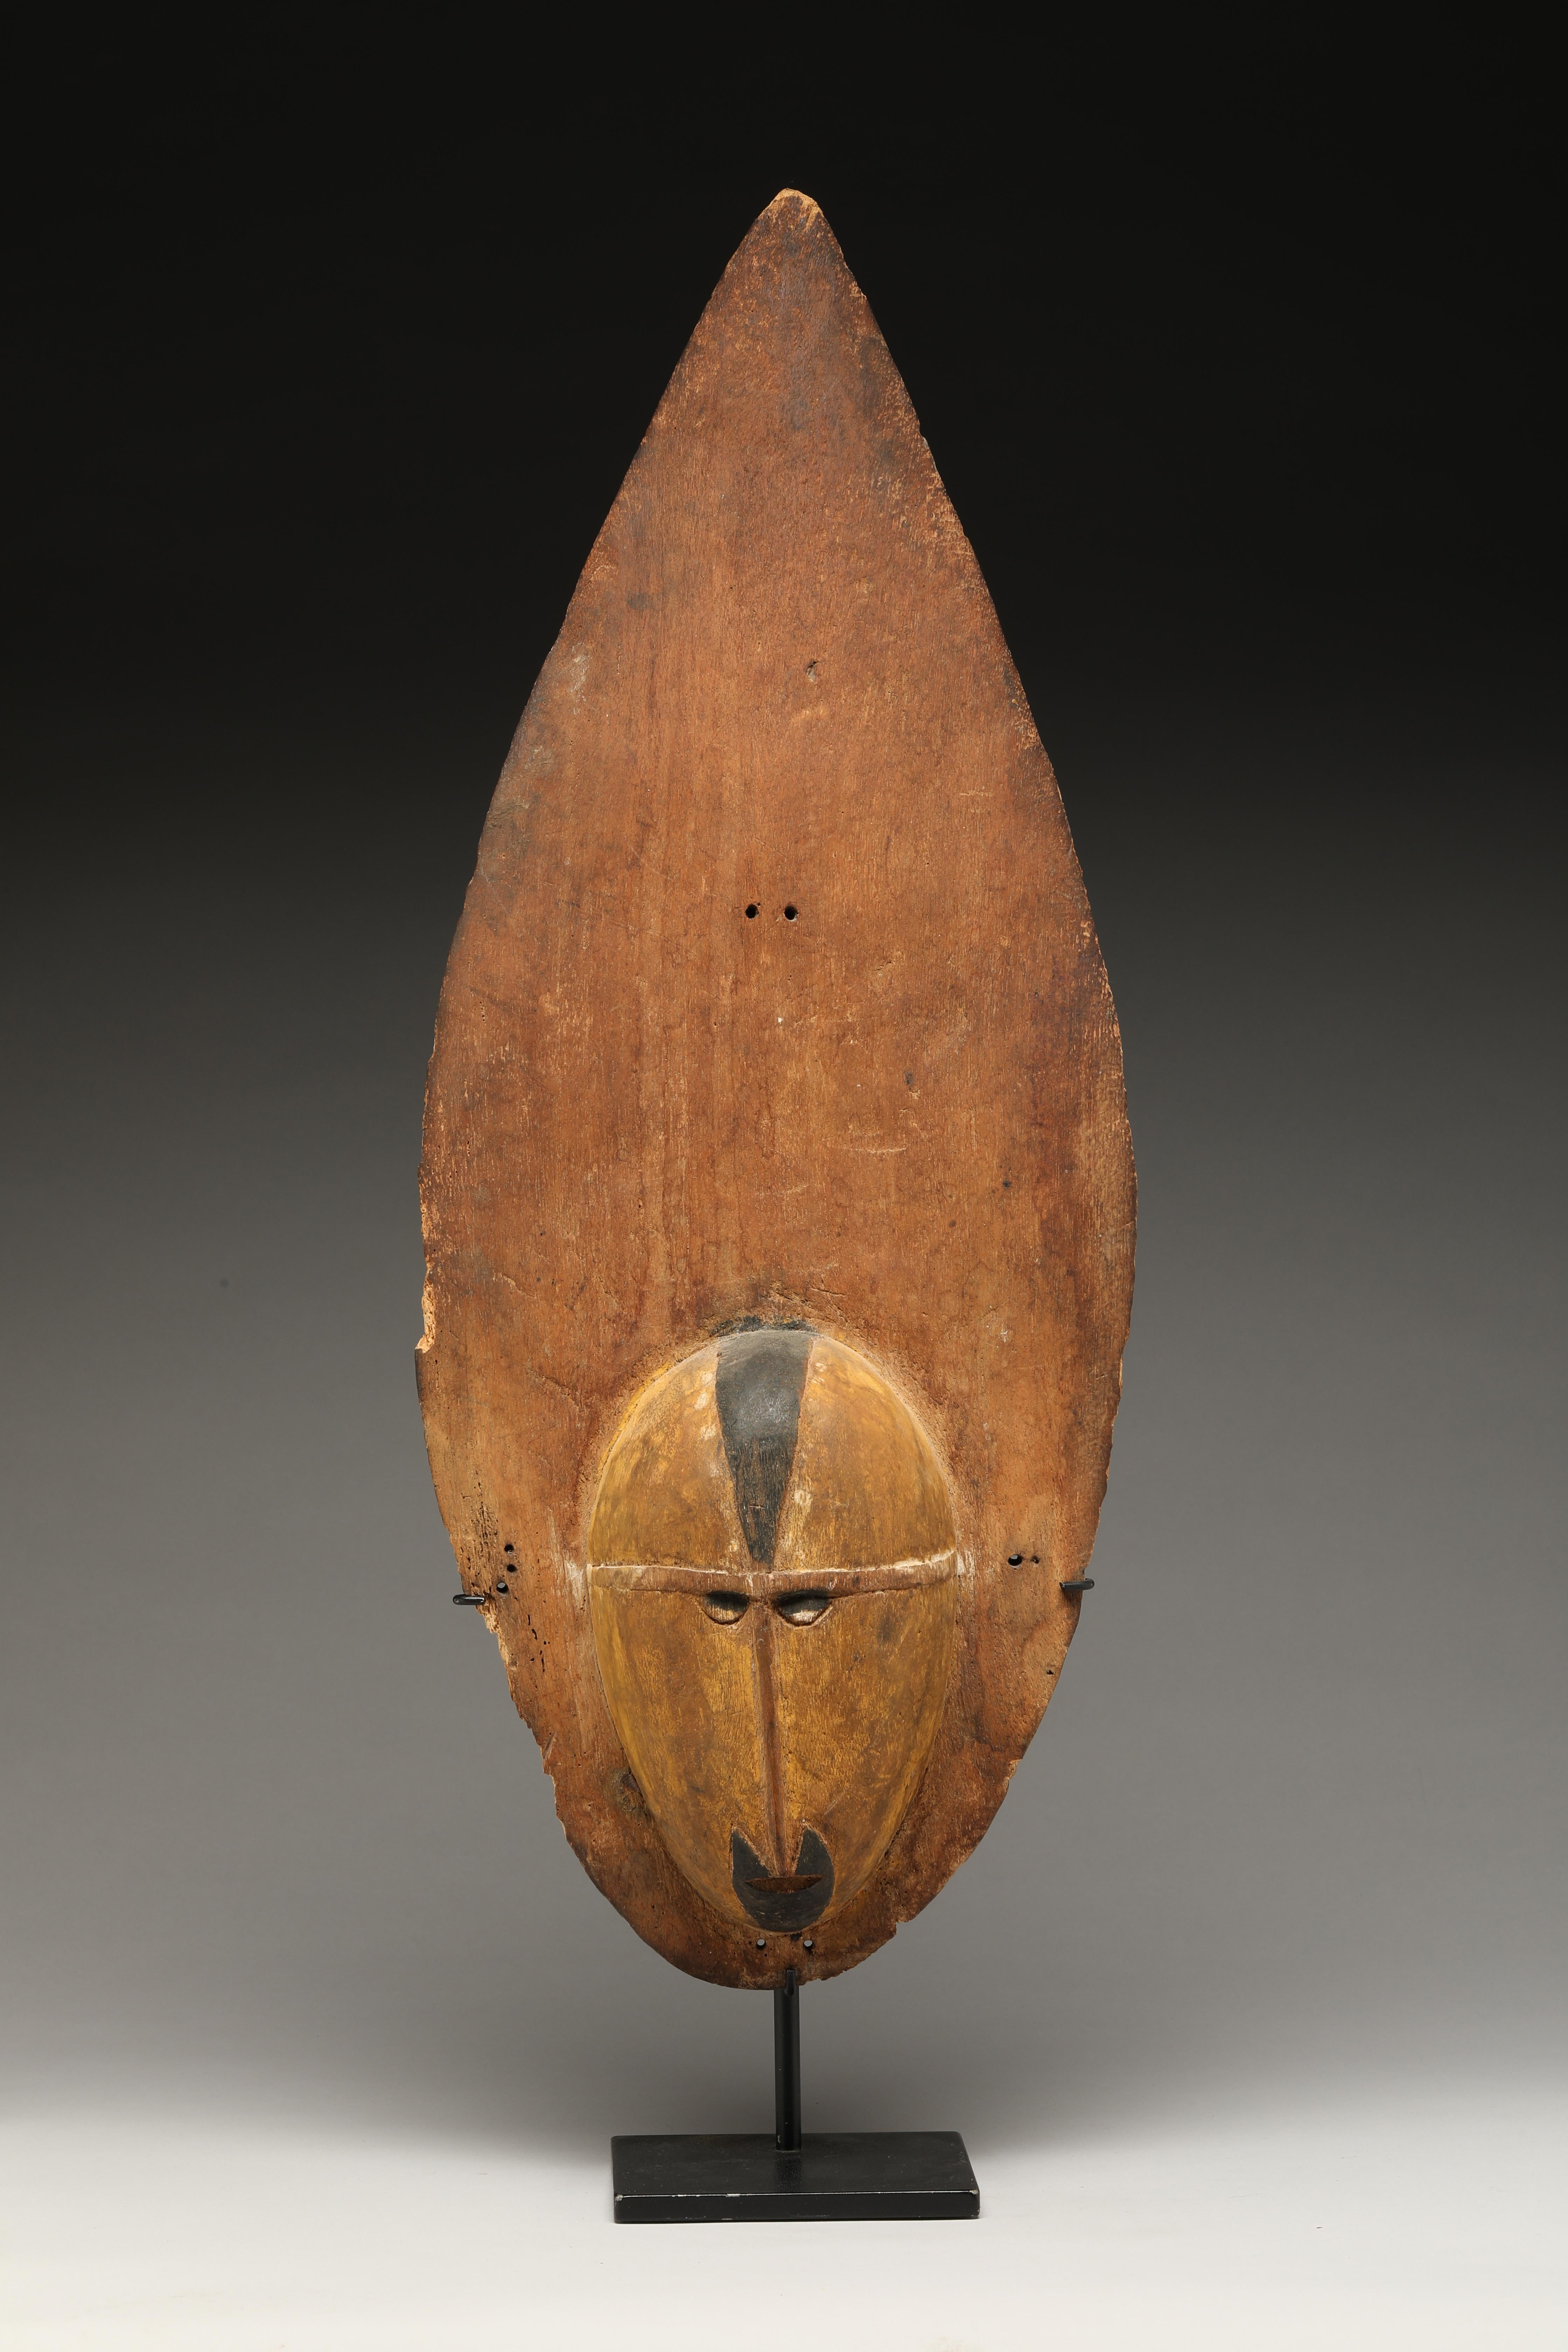 Early Papua New Guinea Sepik light wood yam mask. Elegant flame shaped form, old, oxidized wood with black accents, traces of yellow and white pigments. Small holes originally for attachment. Refined well carved face. Old chips and wear around